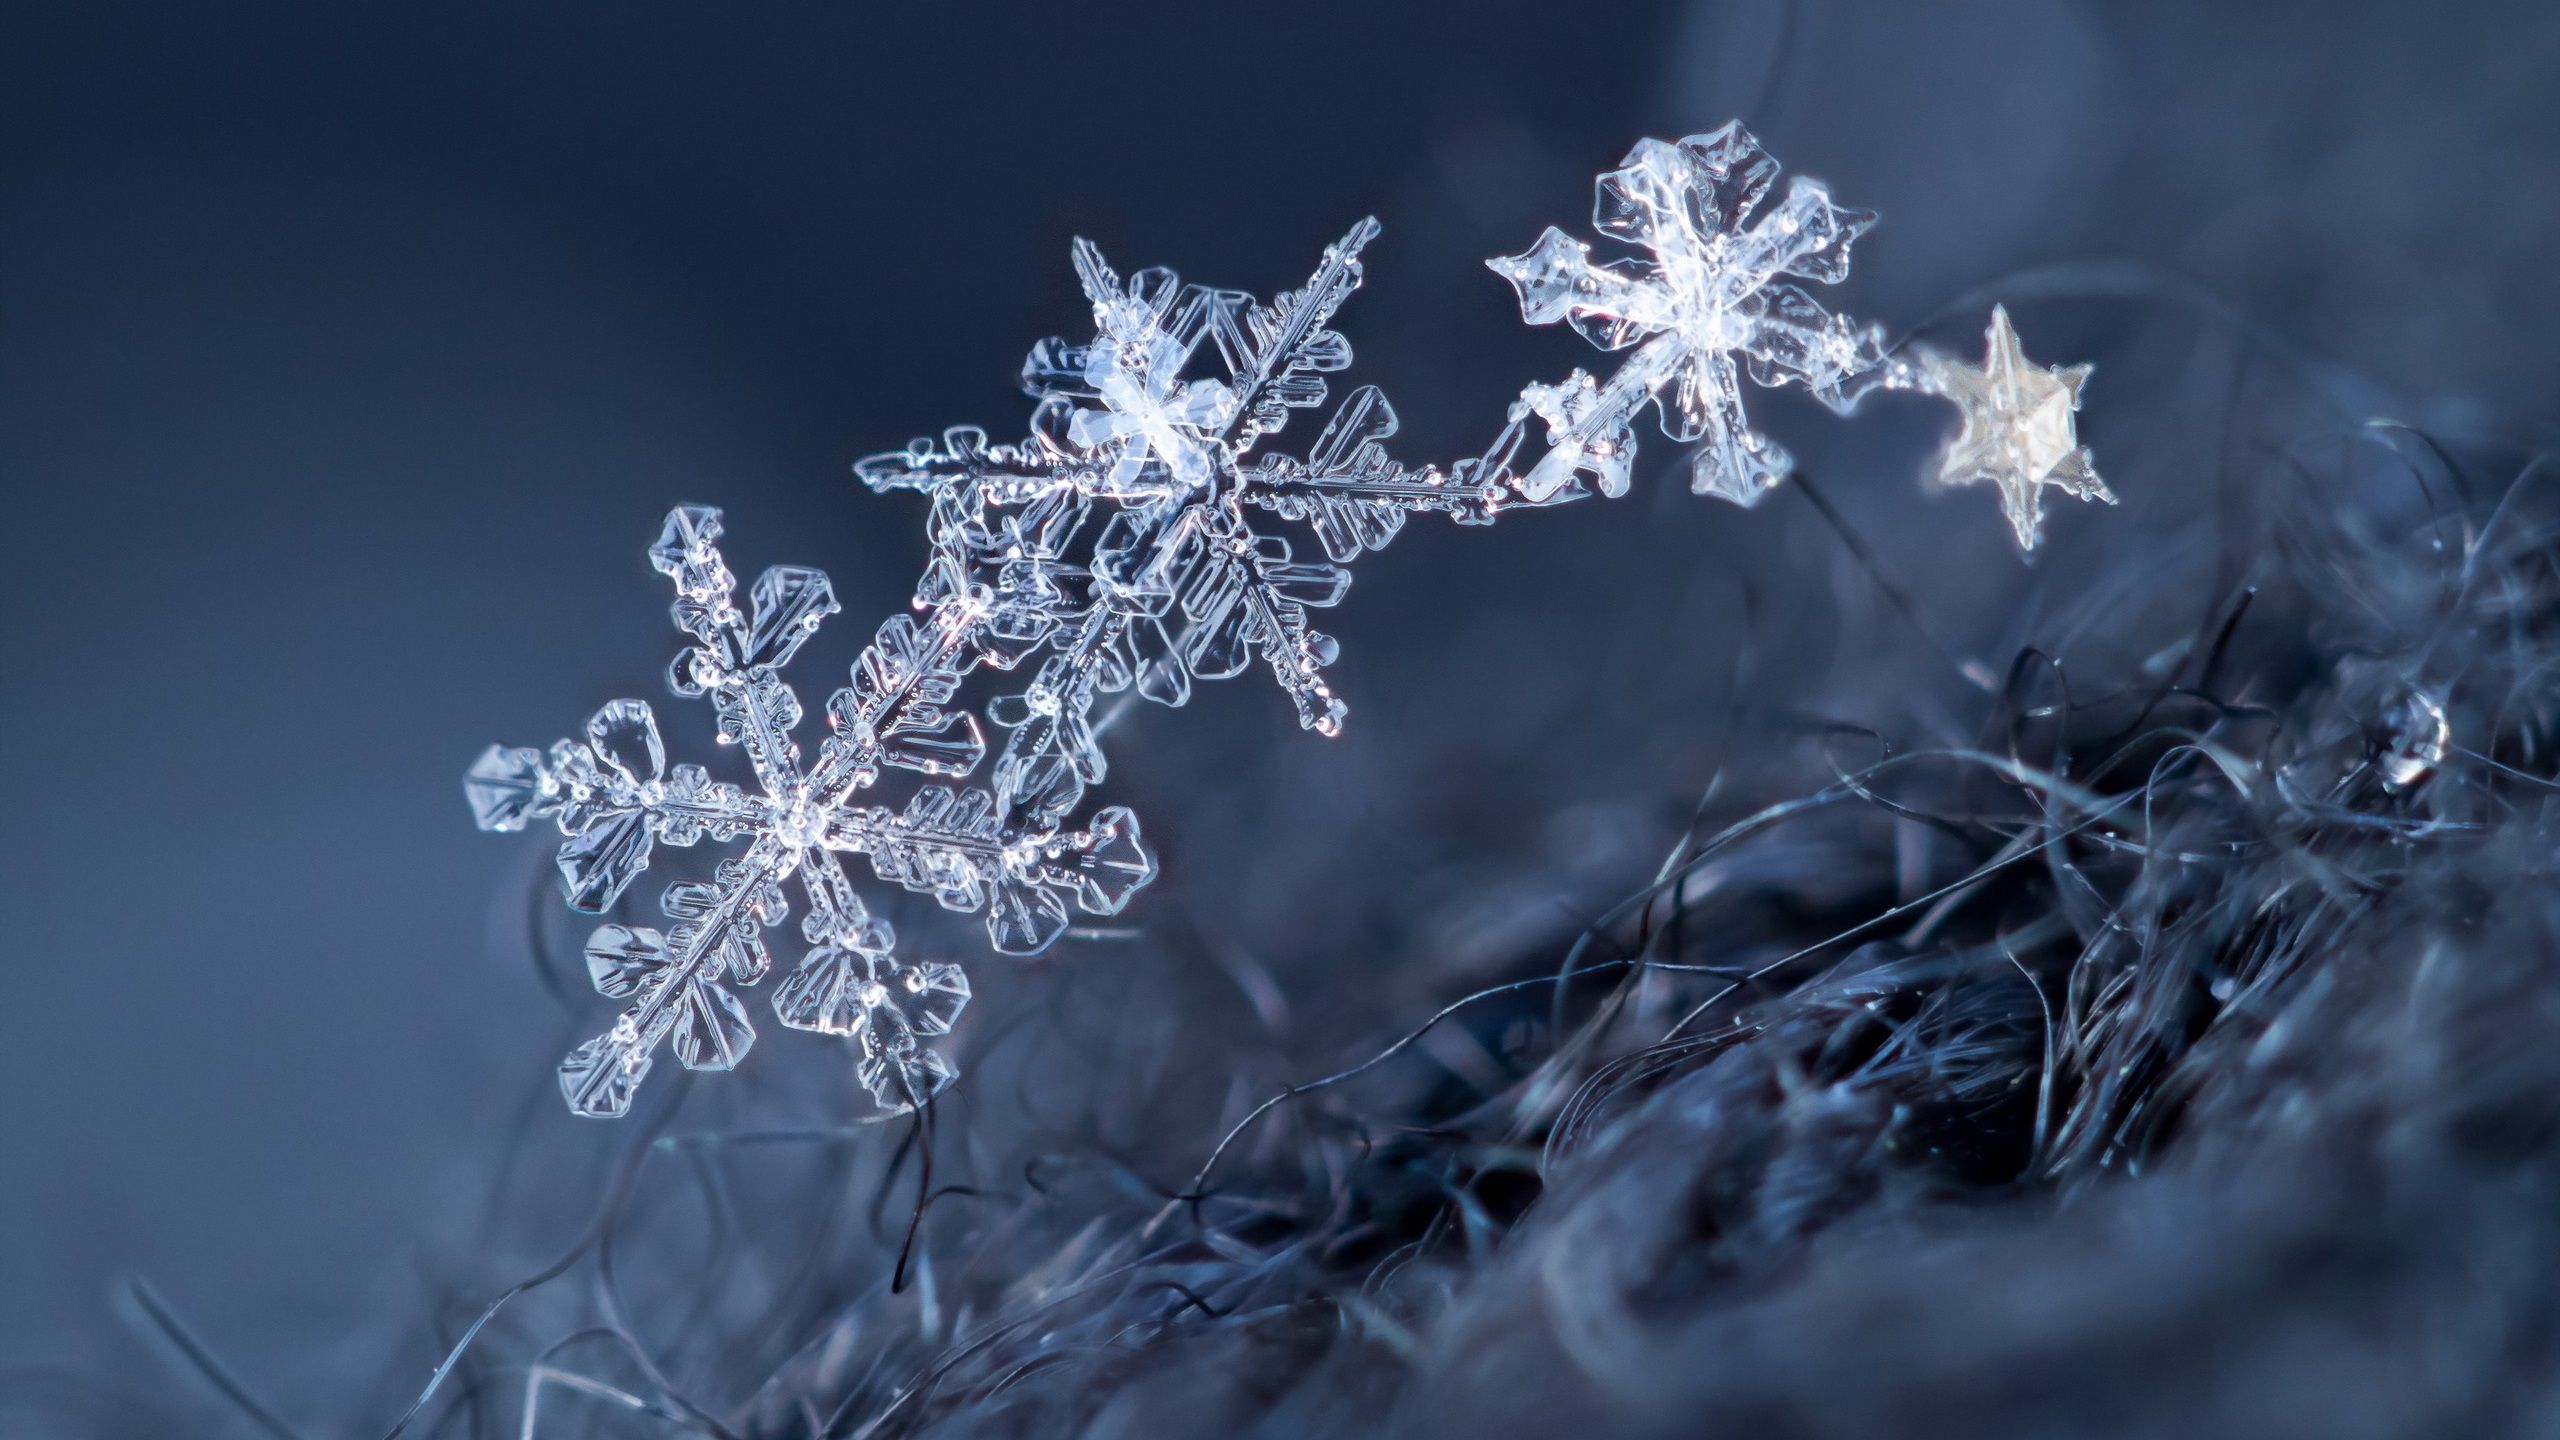 Wallpaper Ice crystal, snowflakes, winter 2560x1600 HD Picture, Image